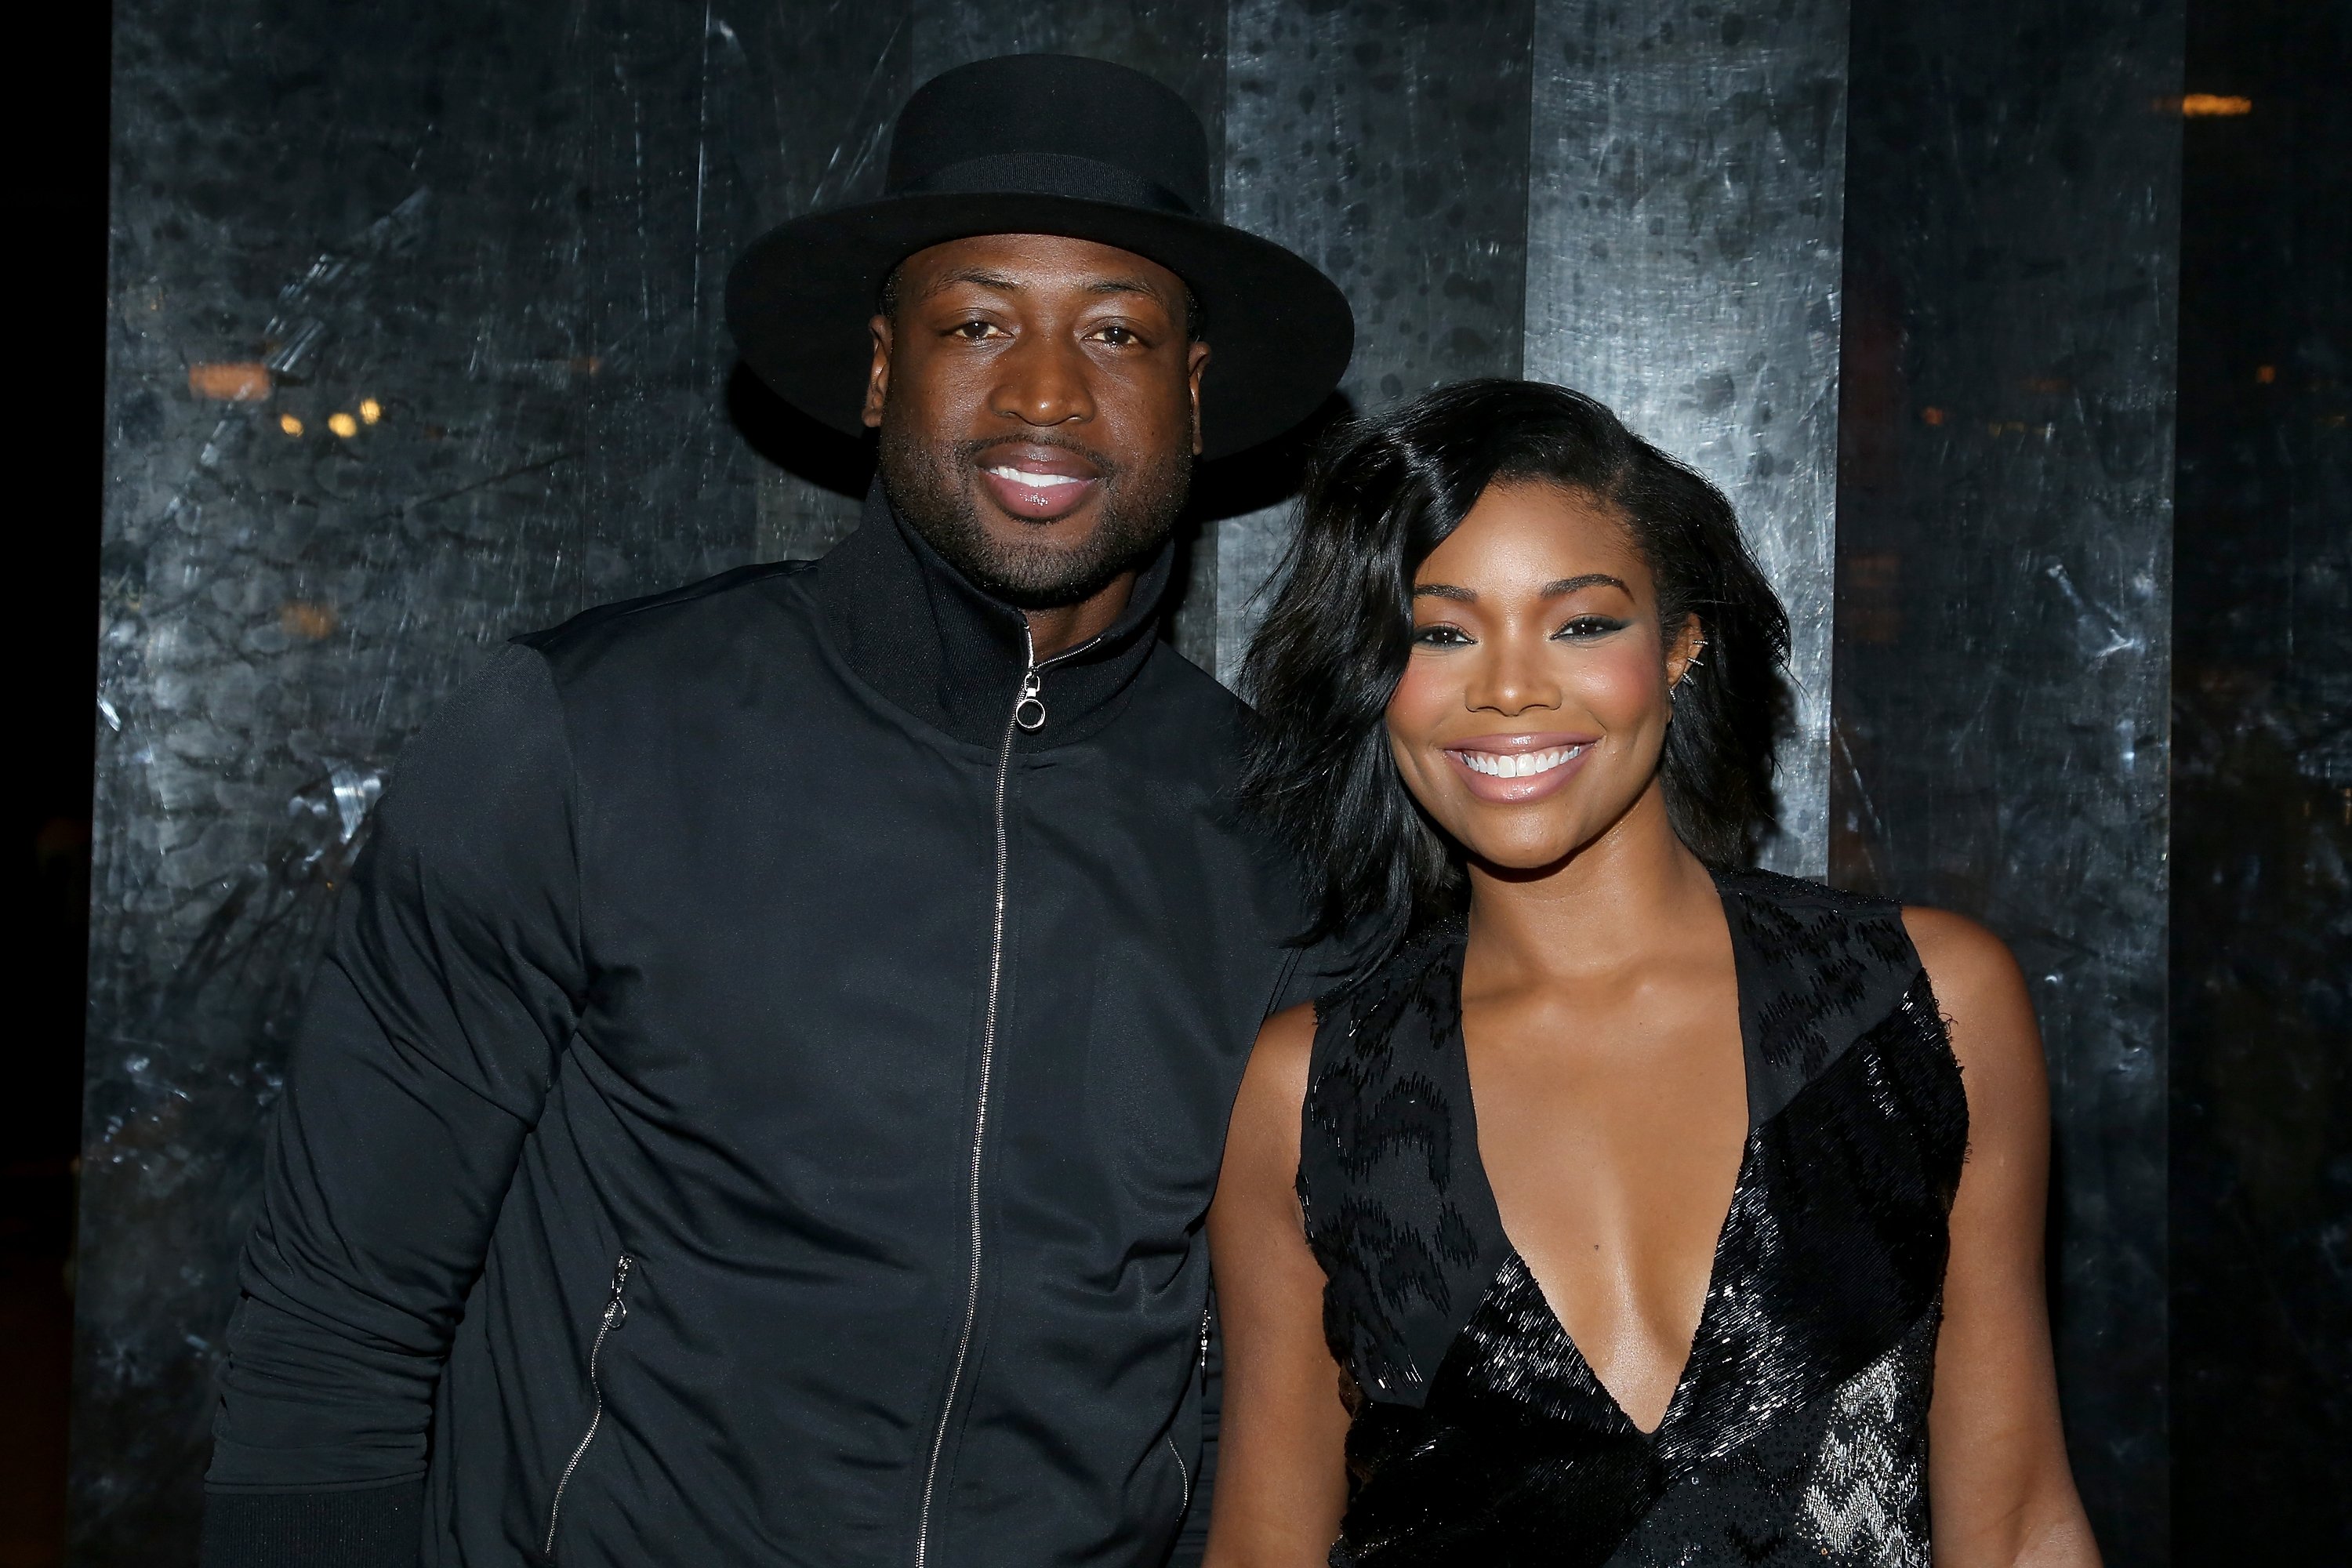 Gabrielle Union & Dwyane Wade during New York Fashion Week on September 13, 2015 in New York City. | Photo: Getty Images